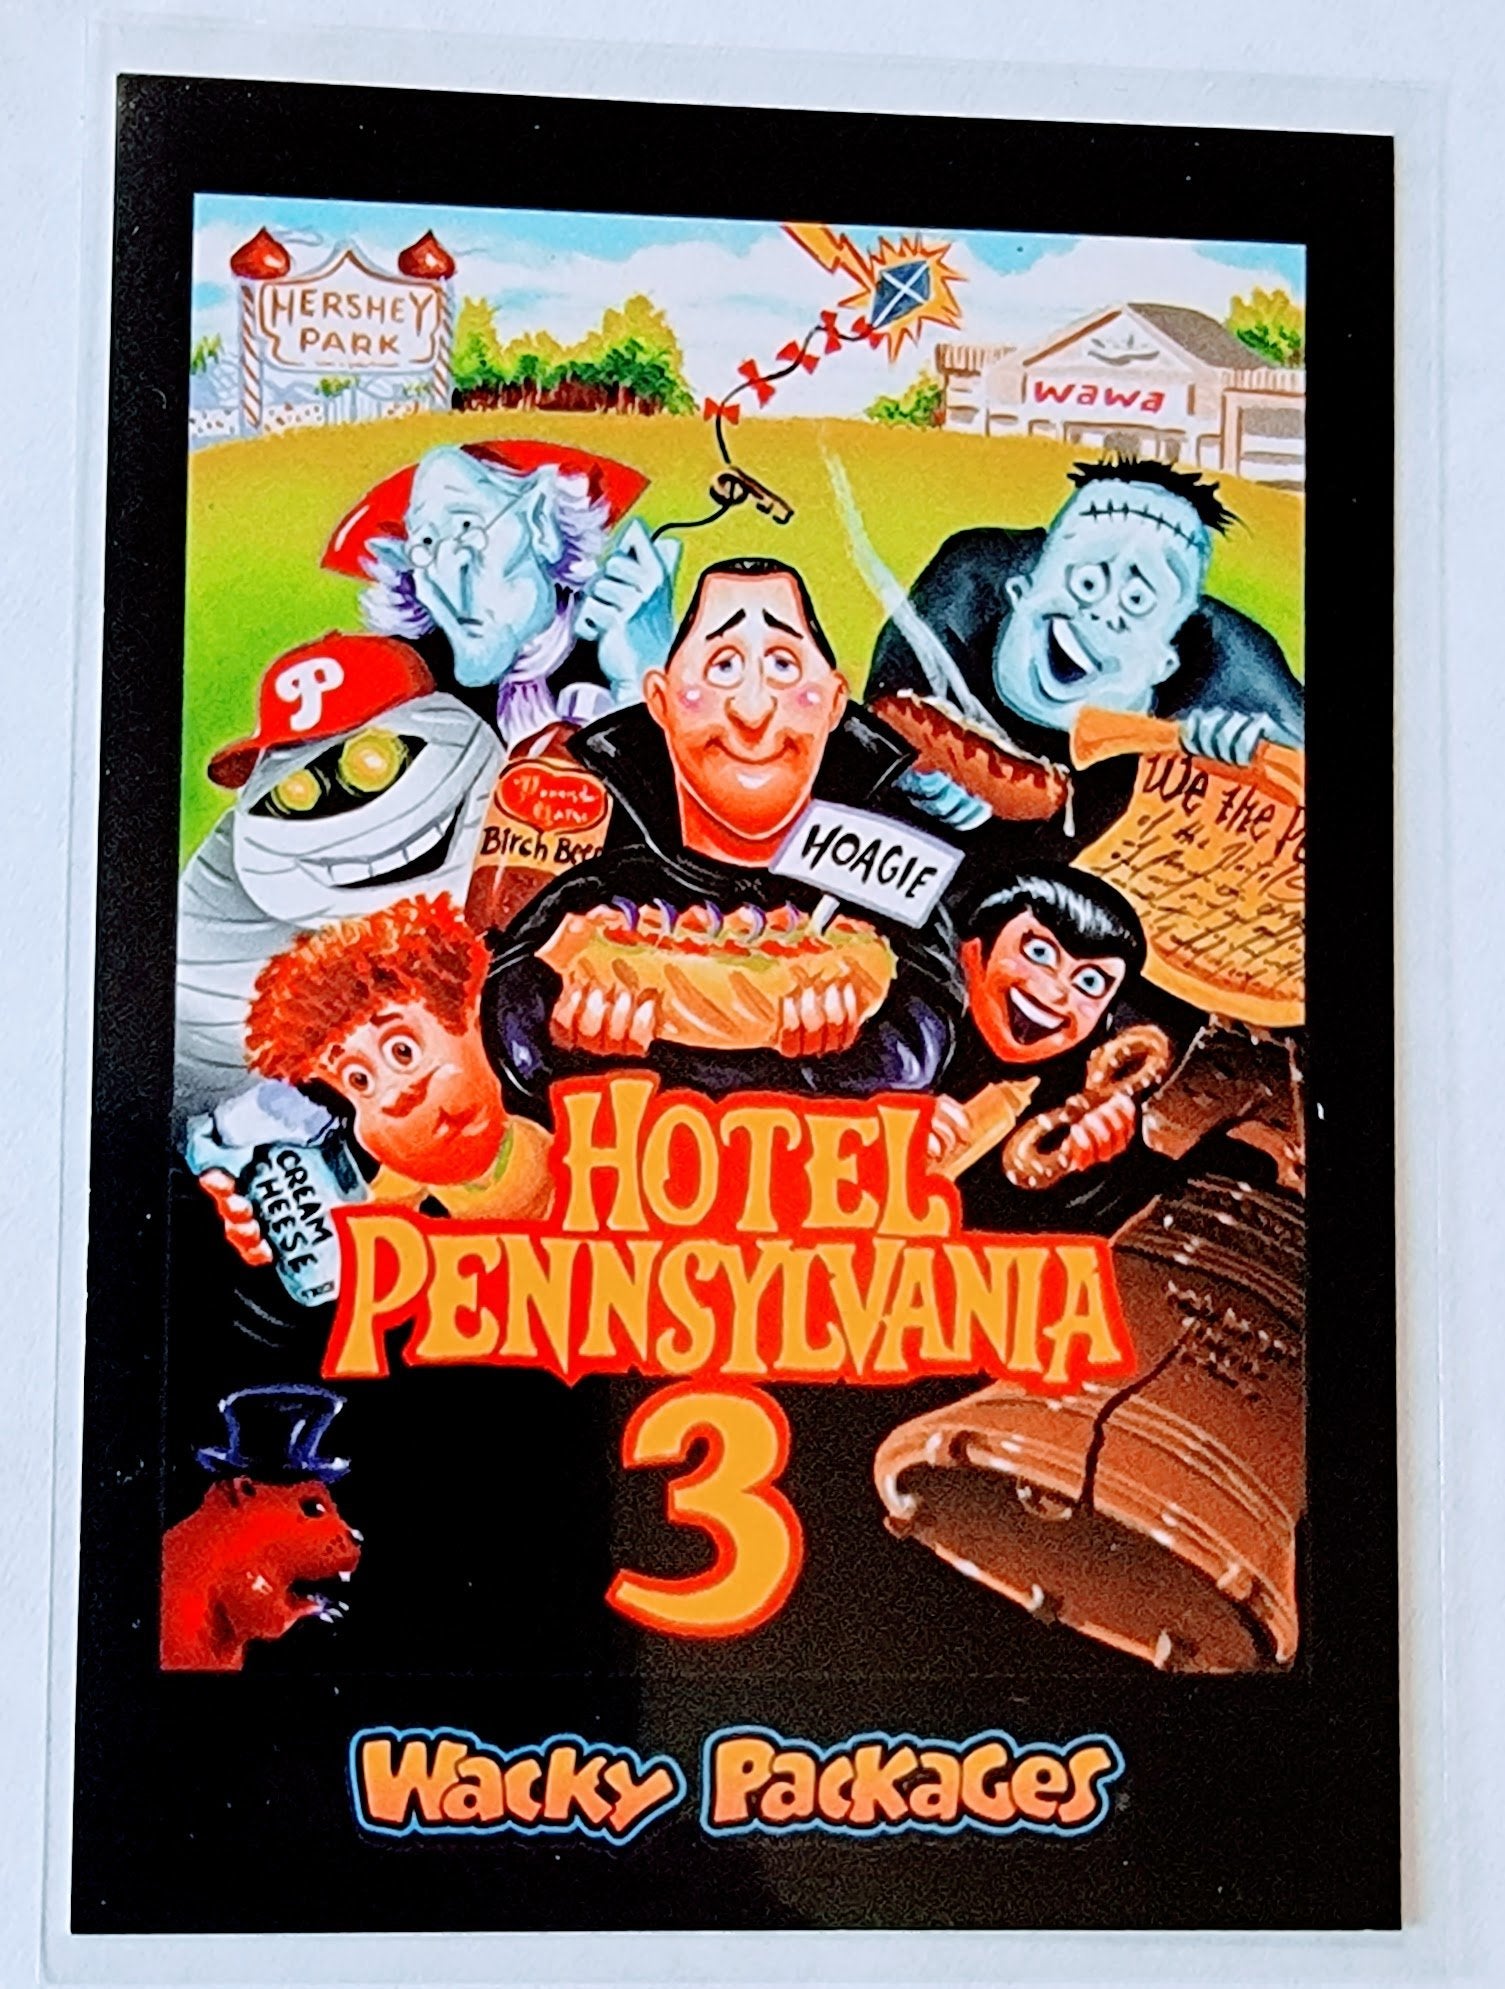 2017 Wacky Packages 50th Anniversary Hotel Pennsylvania 3 Sticker Trading Card MCSC1 simple Xclusive Collectibles   